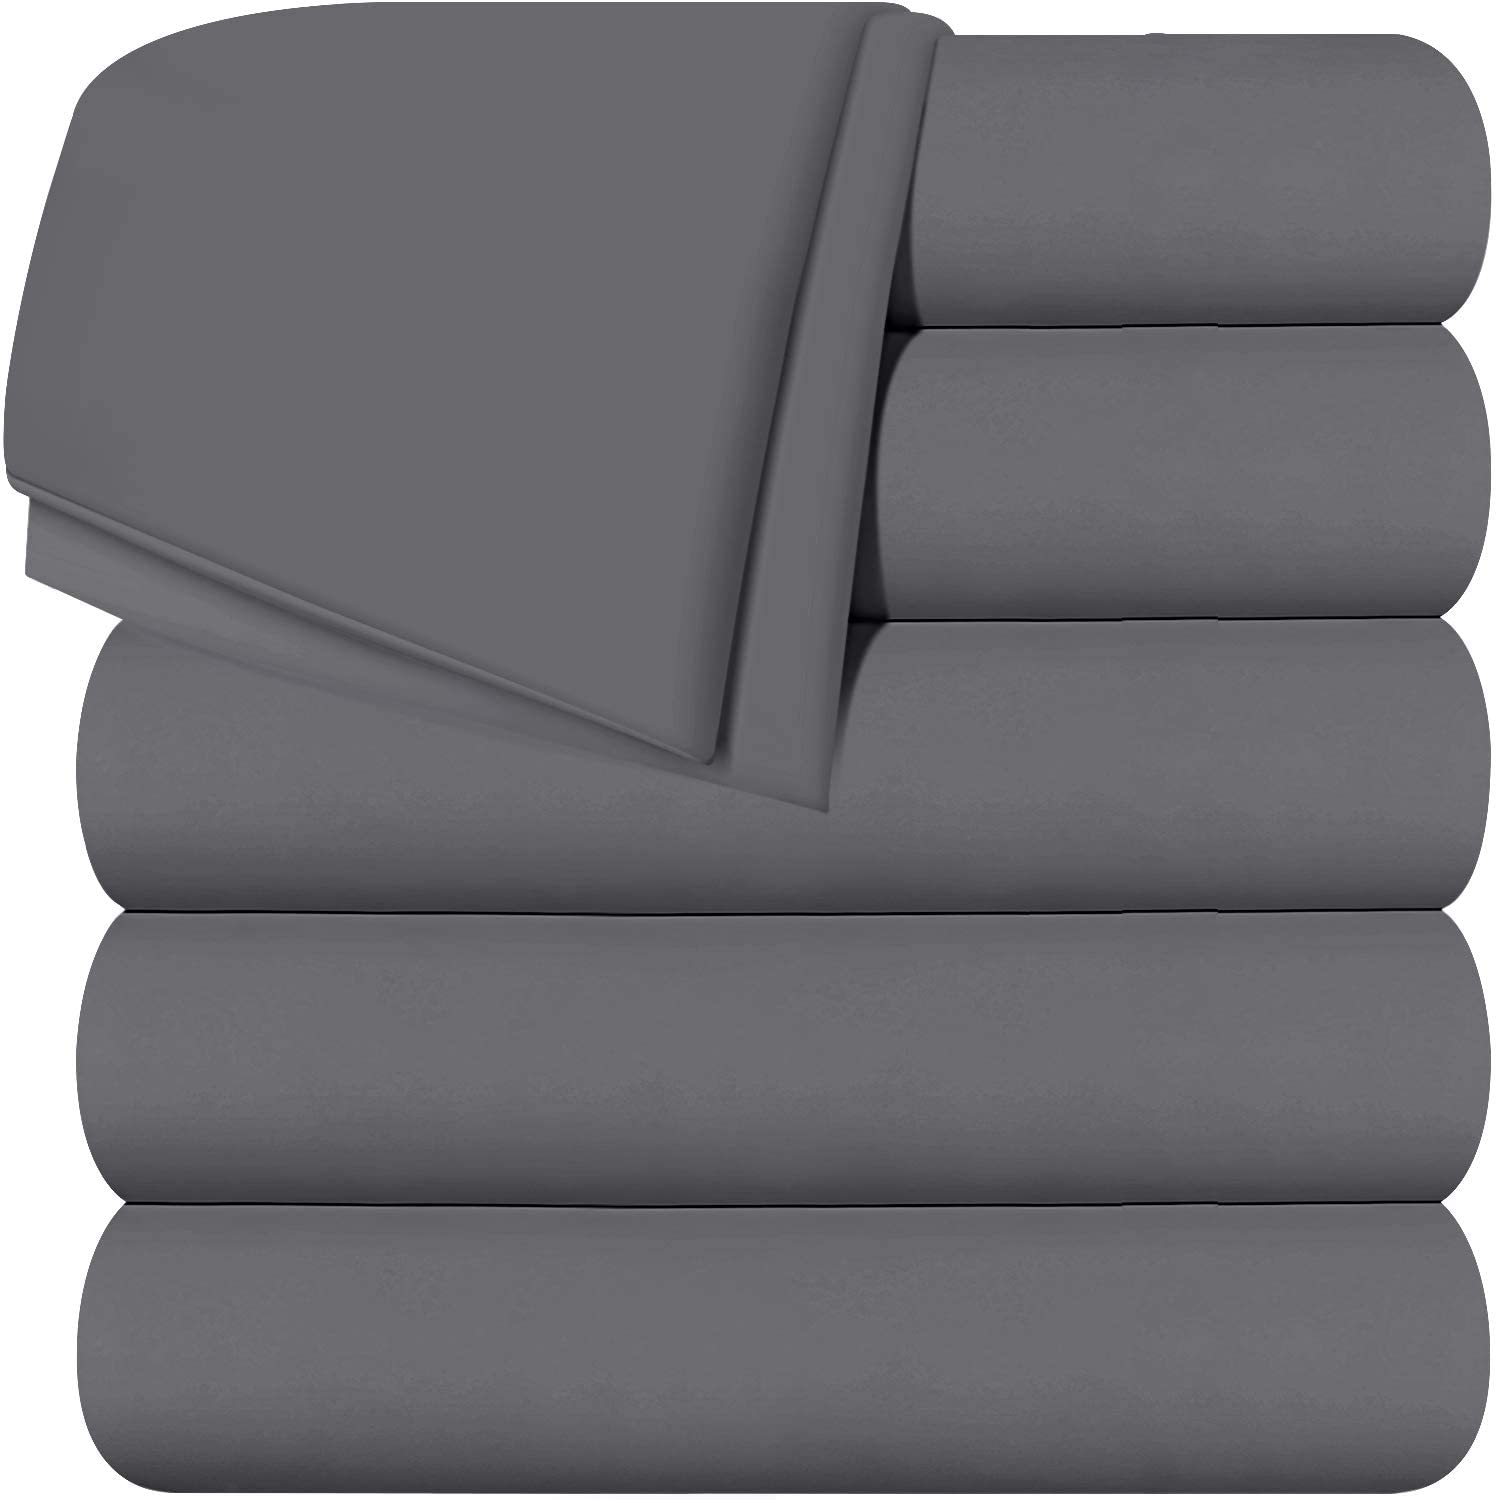 Utopia Bedding Twin Fitted Sheets - Bulk Pack of 6 Bottom Sheets